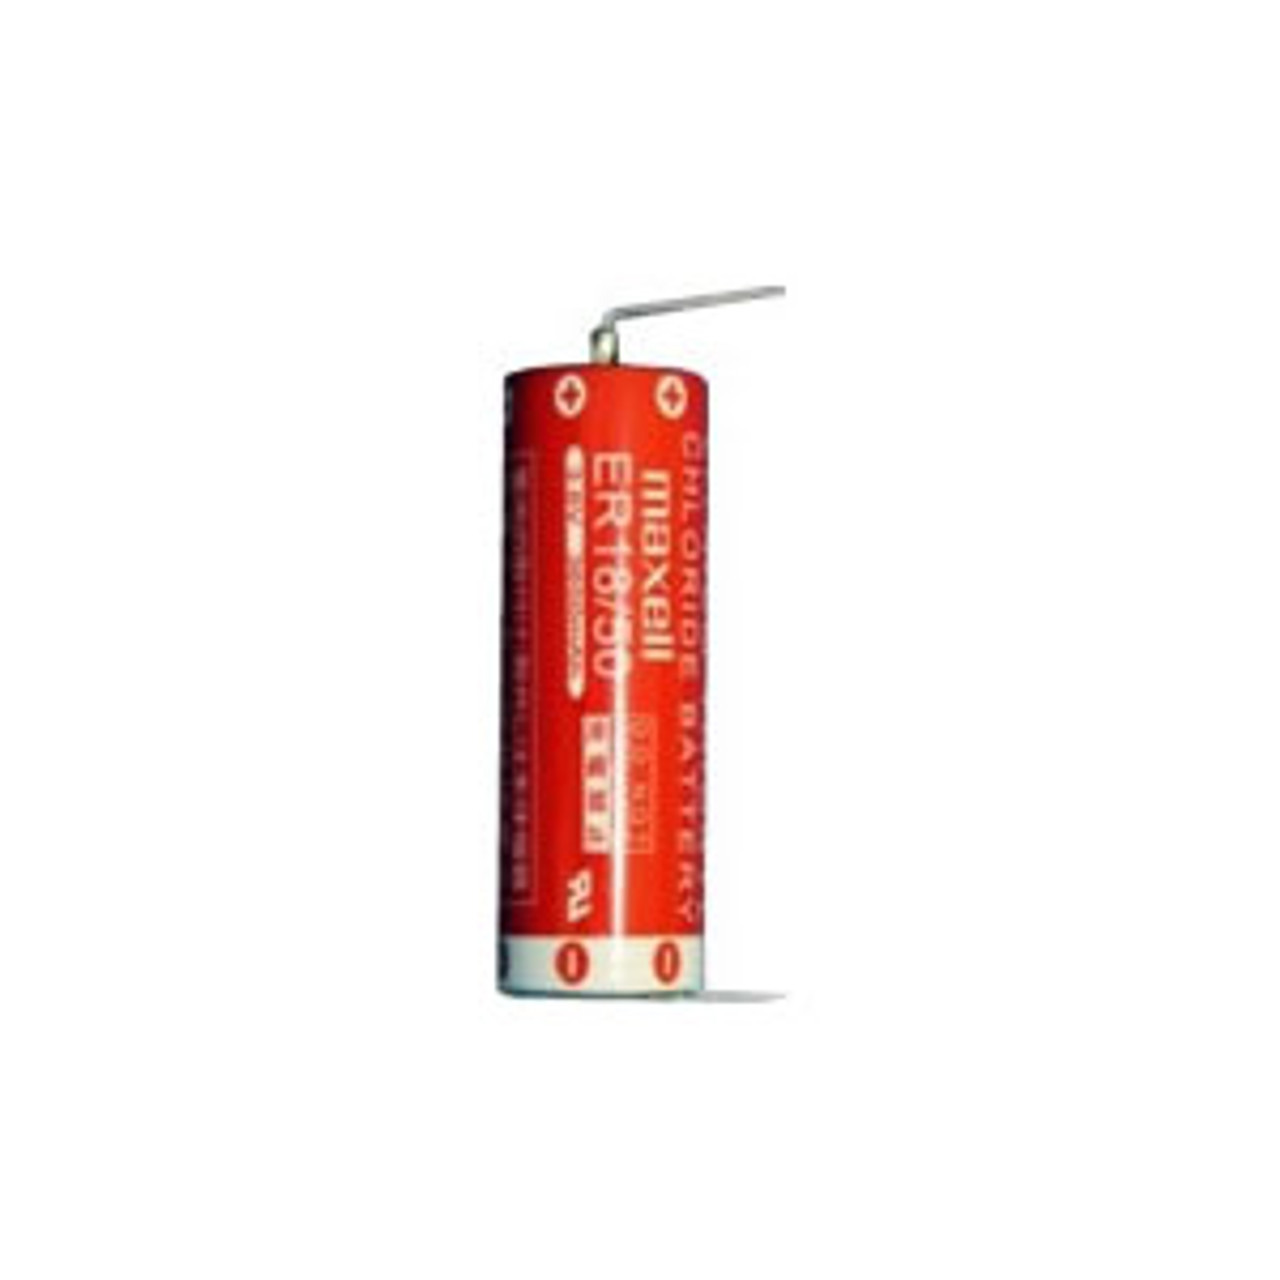 Maxell ER18/50 -2PC Battery - 3.6V A Cell Lithium with 2 PC Pins